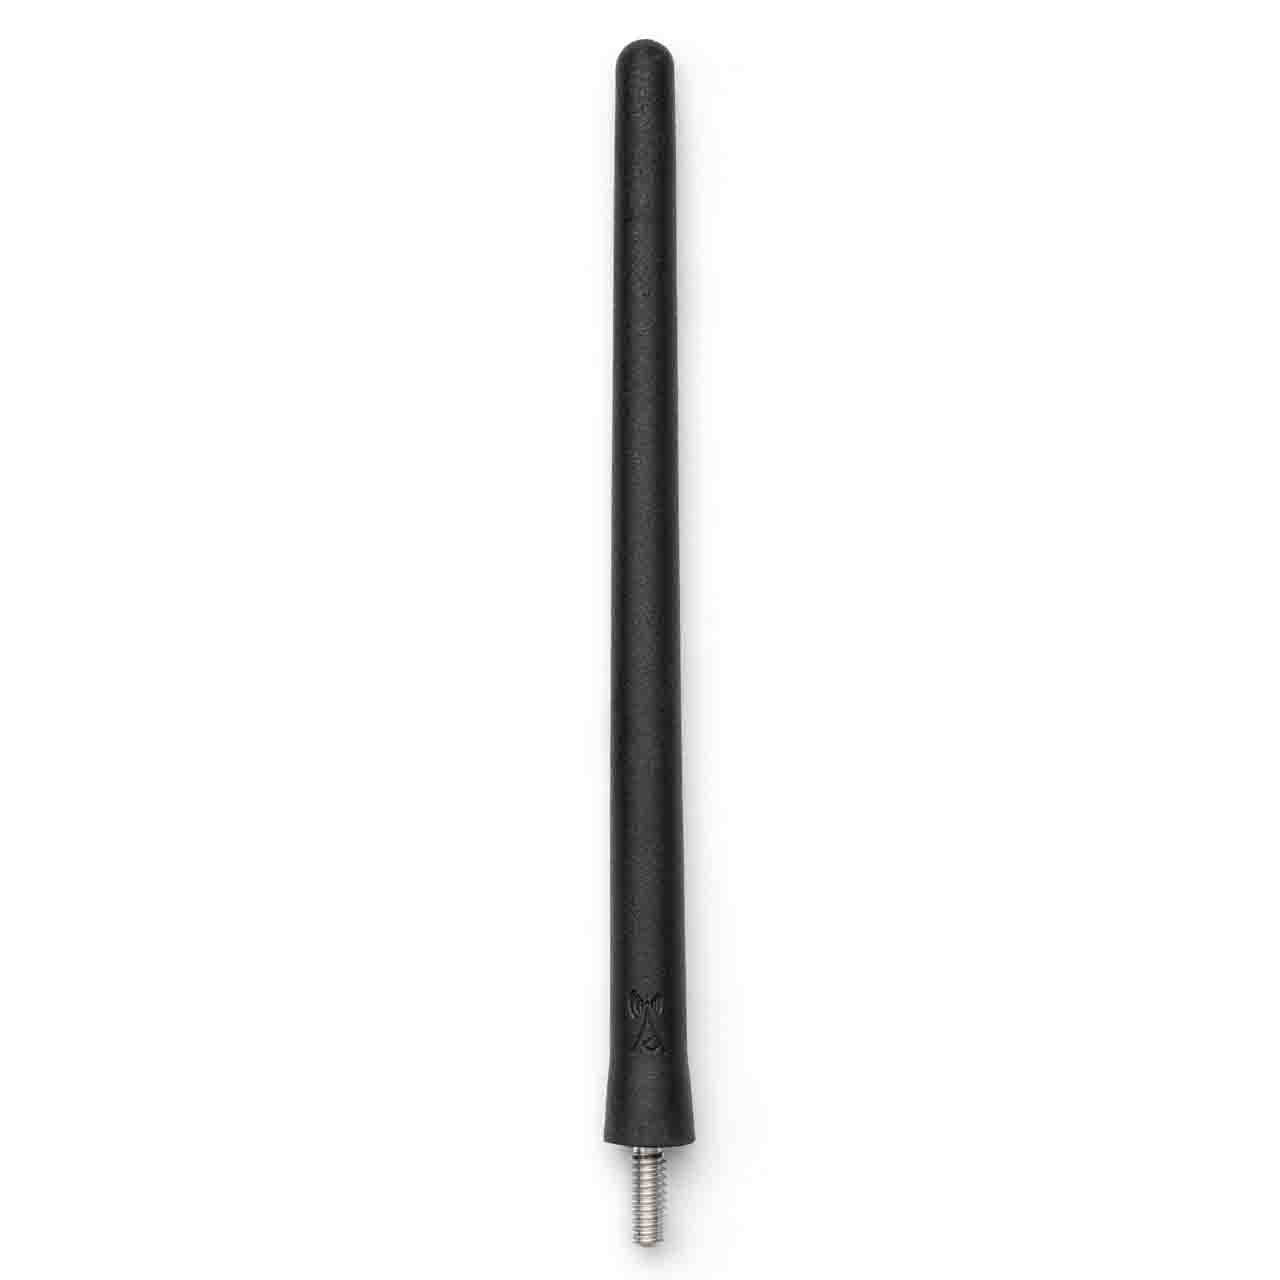 Volvo VNX Short Rubber Antenna 6 3/4 Inch - Car Wash Proof - USA Stainless Steel Threading - Powerful Internal Copper Coil/Premium Reception